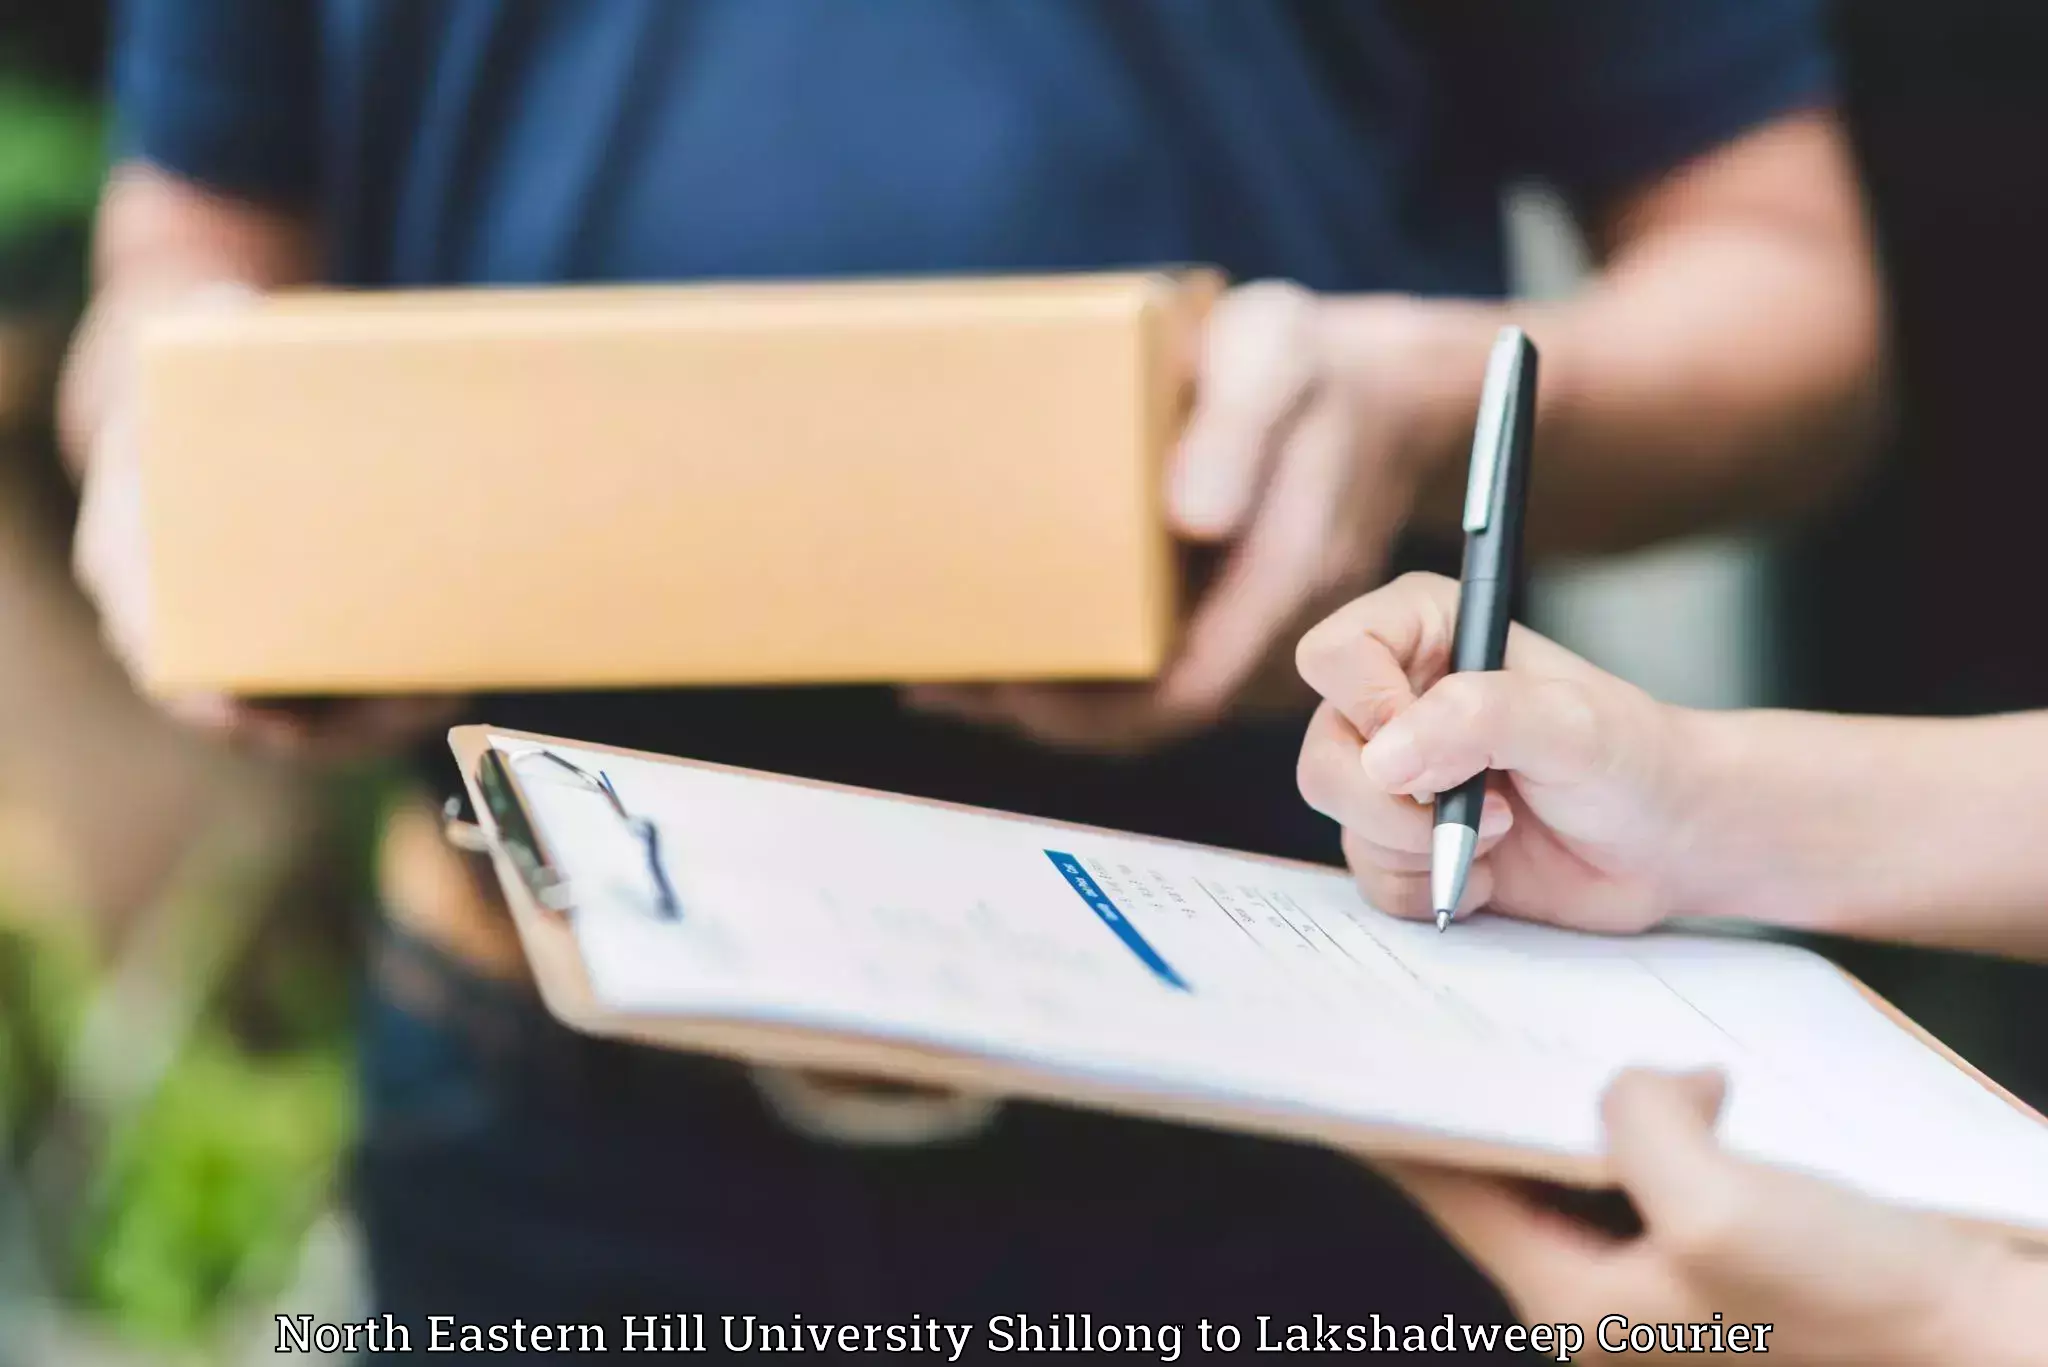 Advanced moving services North Eastern Hill University Shillong to Lakshadweep